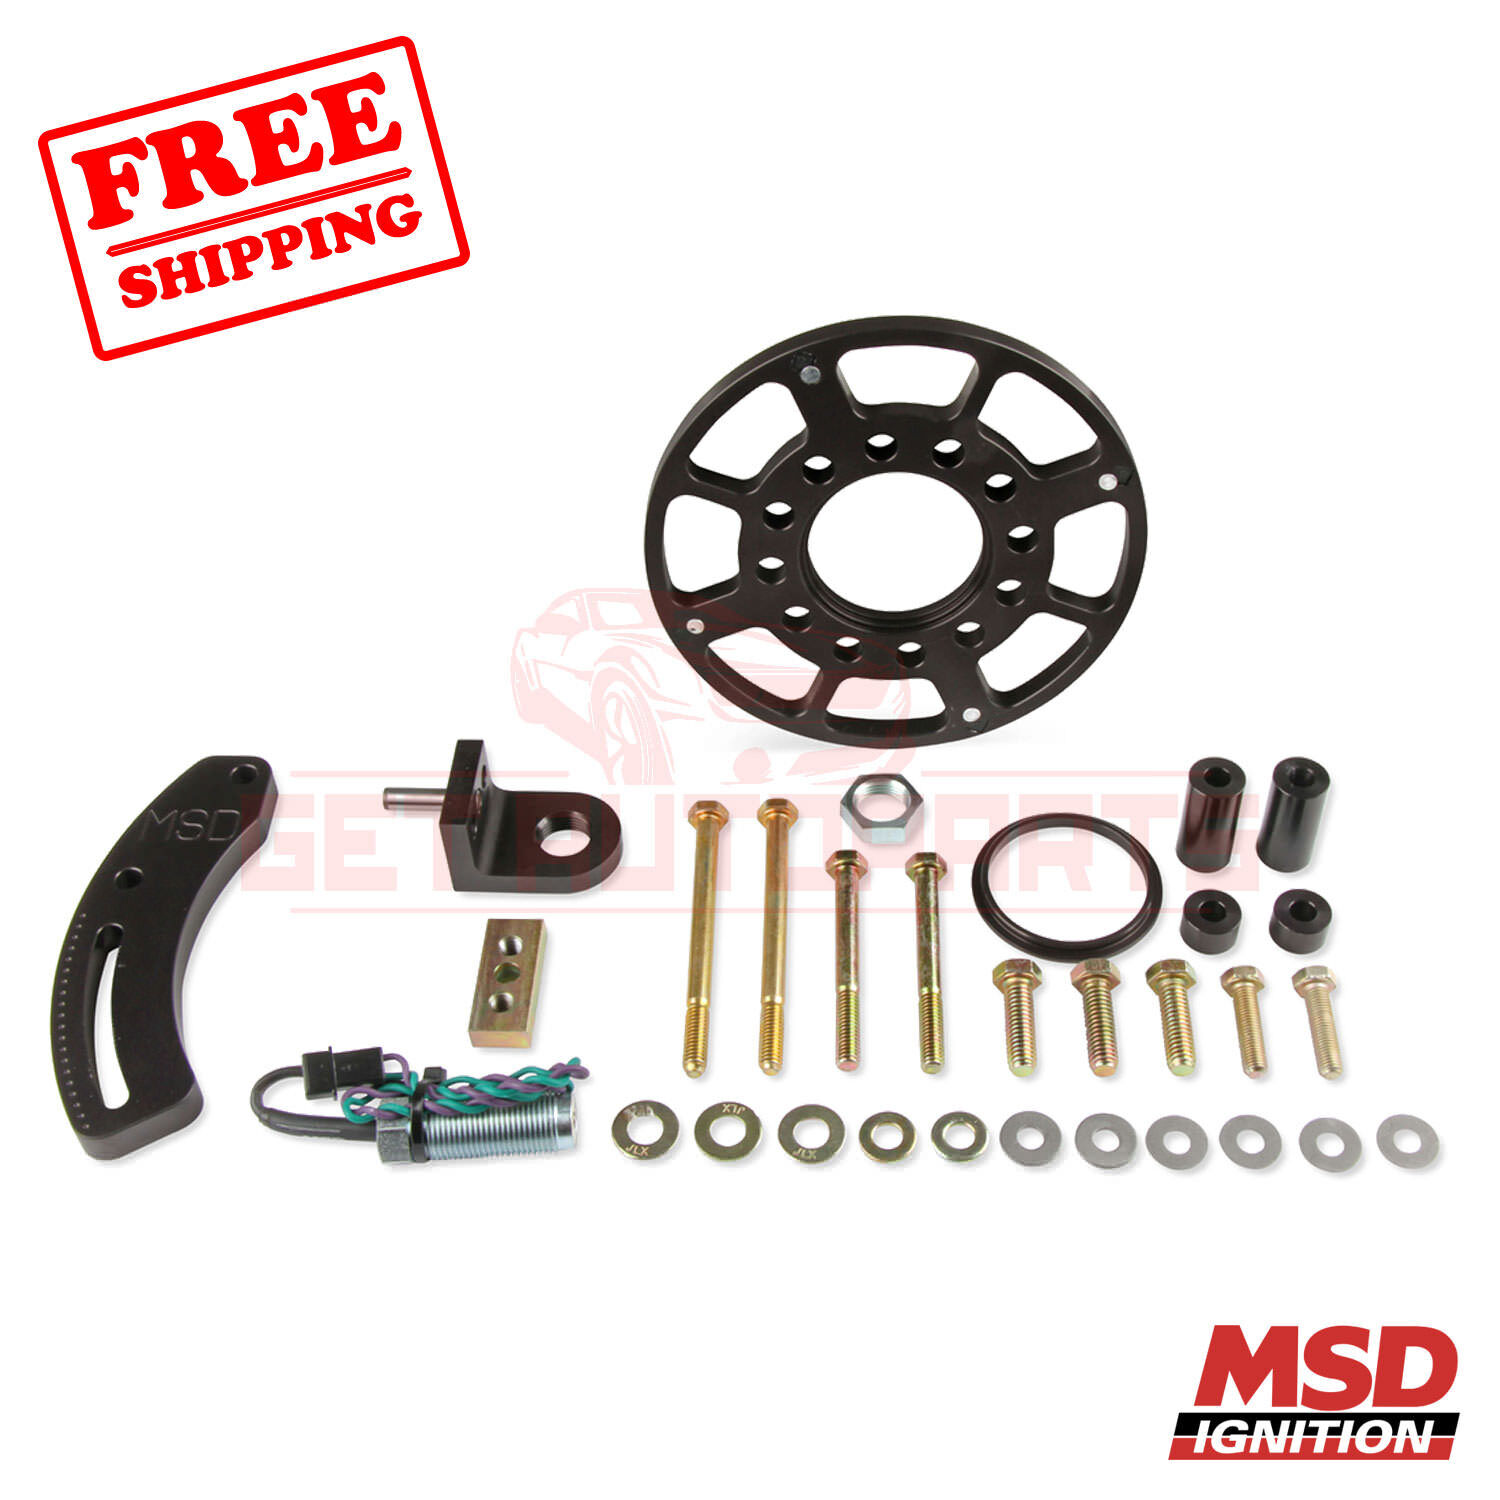 MSD Ignition Kit for Griffith 200 1964-1965